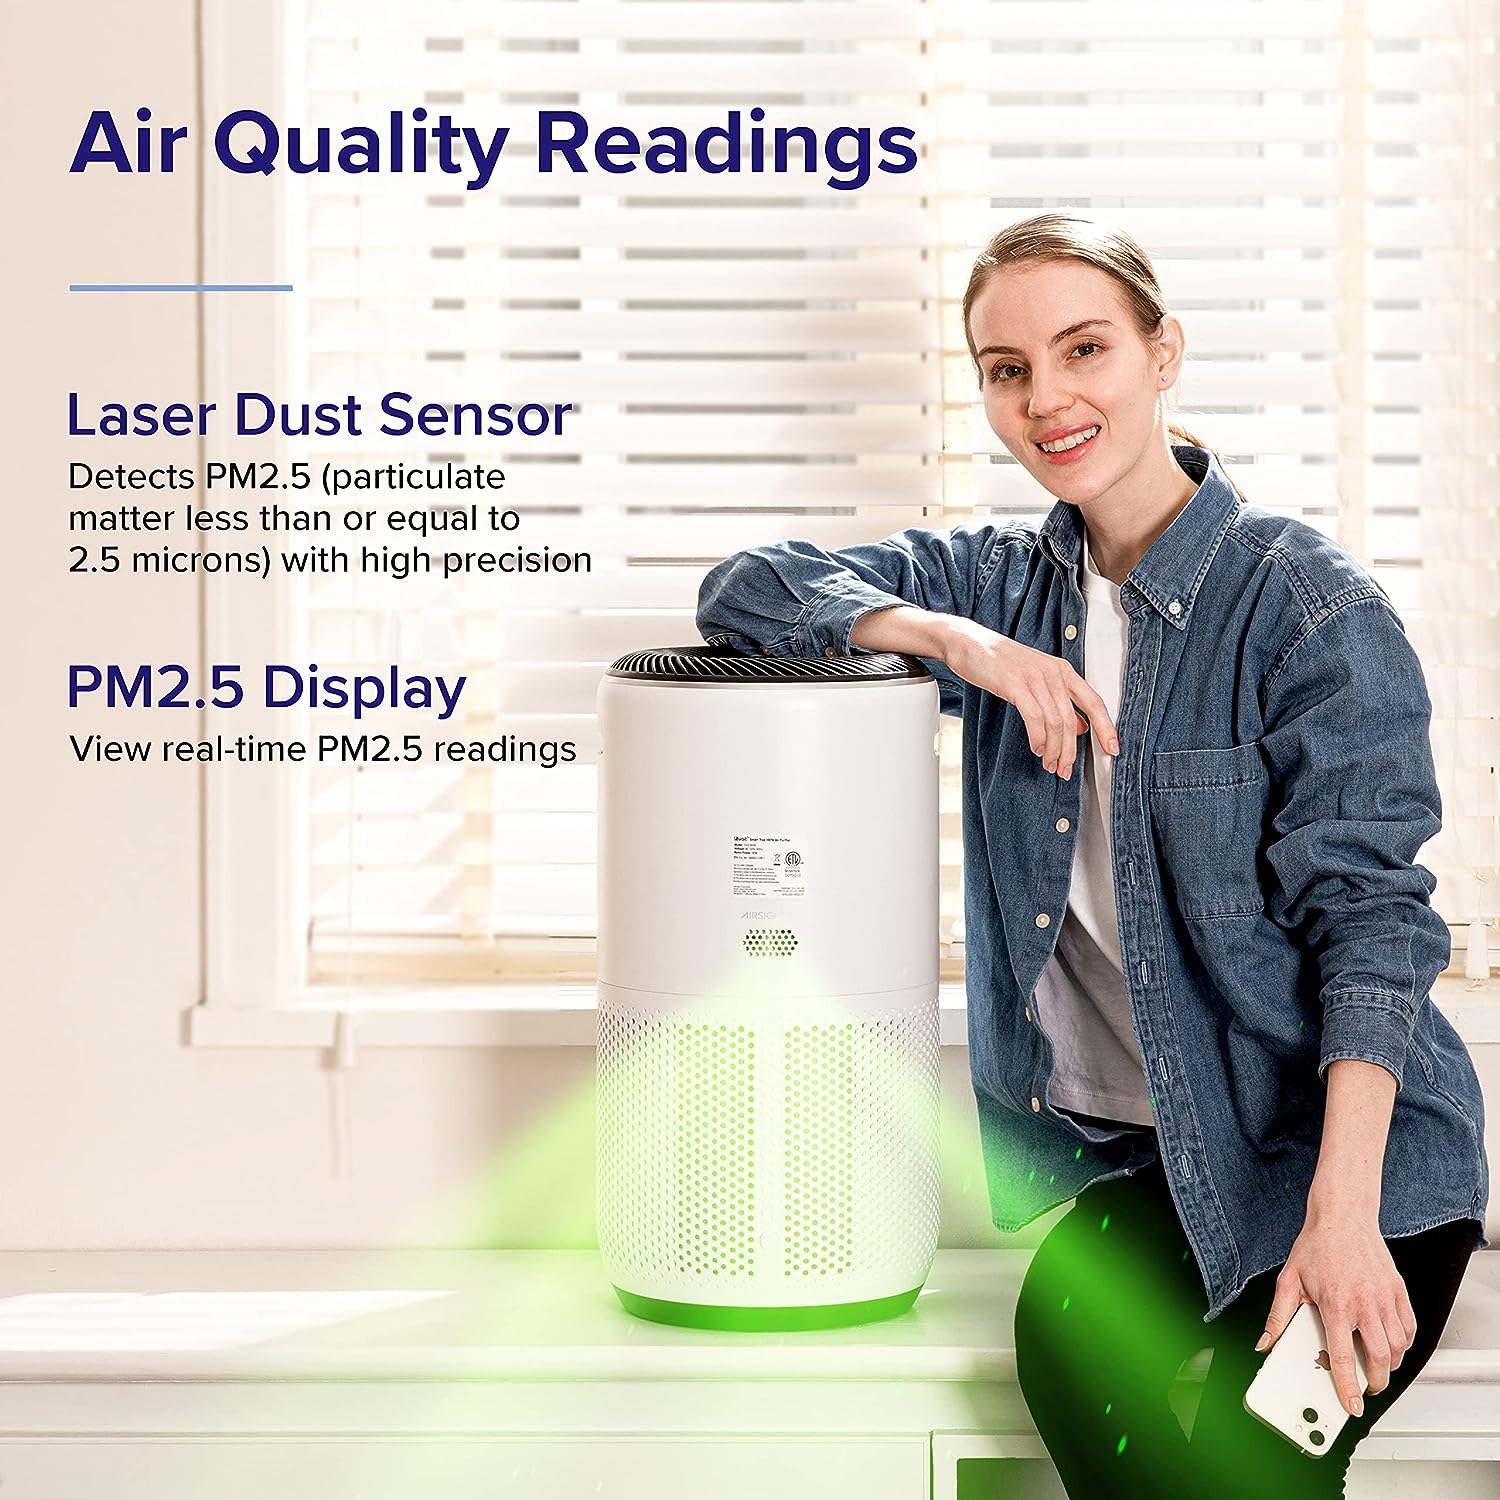 LEVOIT Air Purifier for Home Large Room, White & Air Purifiers for